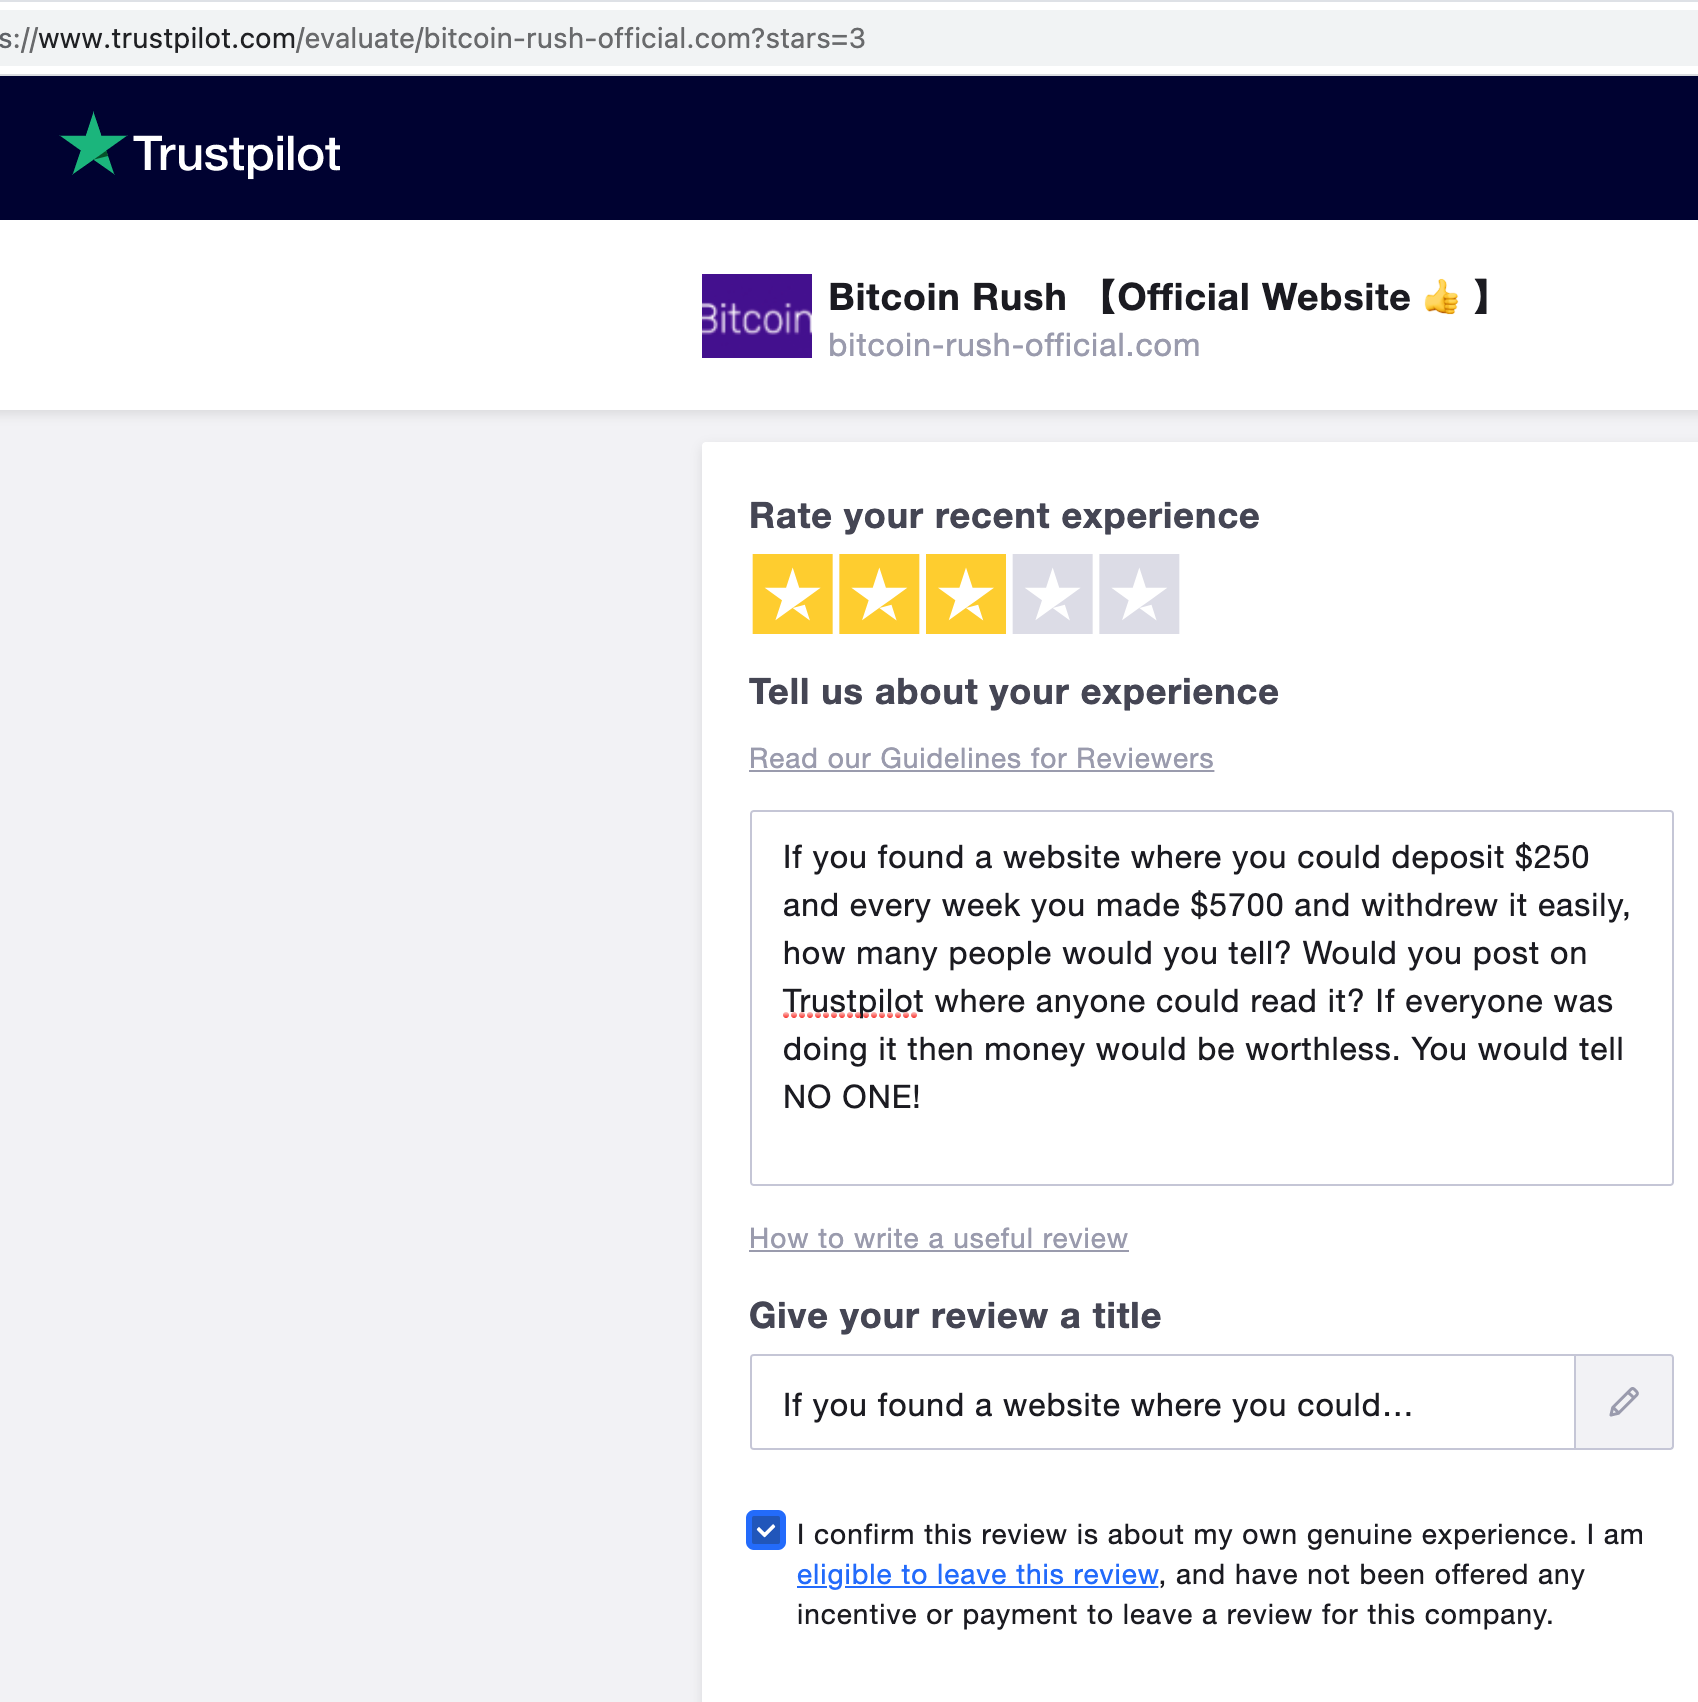 Trustpilot and Scams